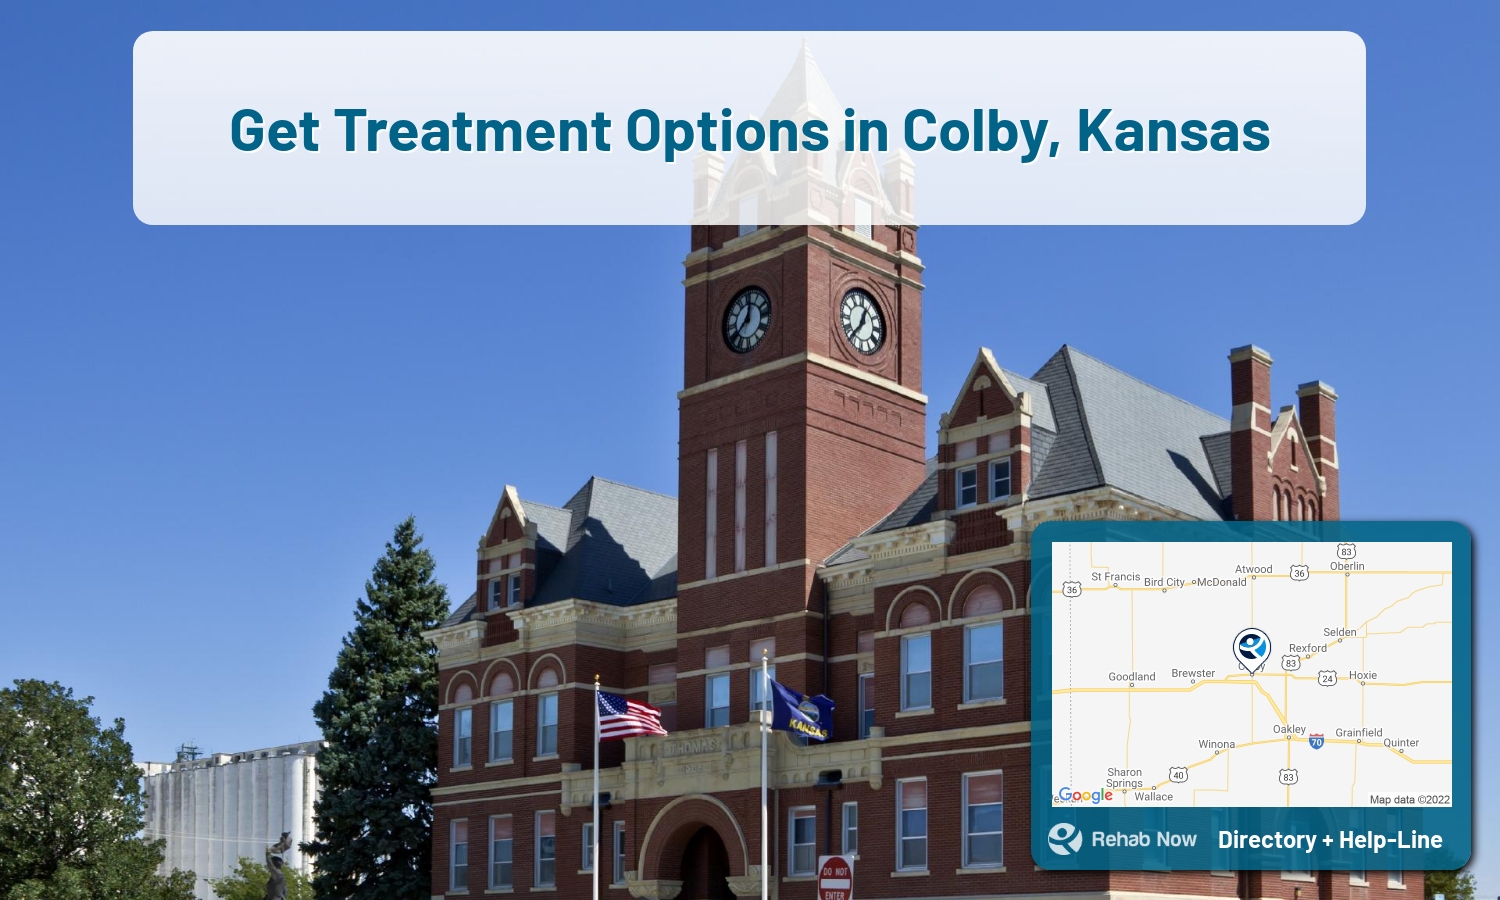 Colby, KS Treatment Centers. Find drug rehab in Colby, Kansas, or detox and treatment programs. Get the right help now!